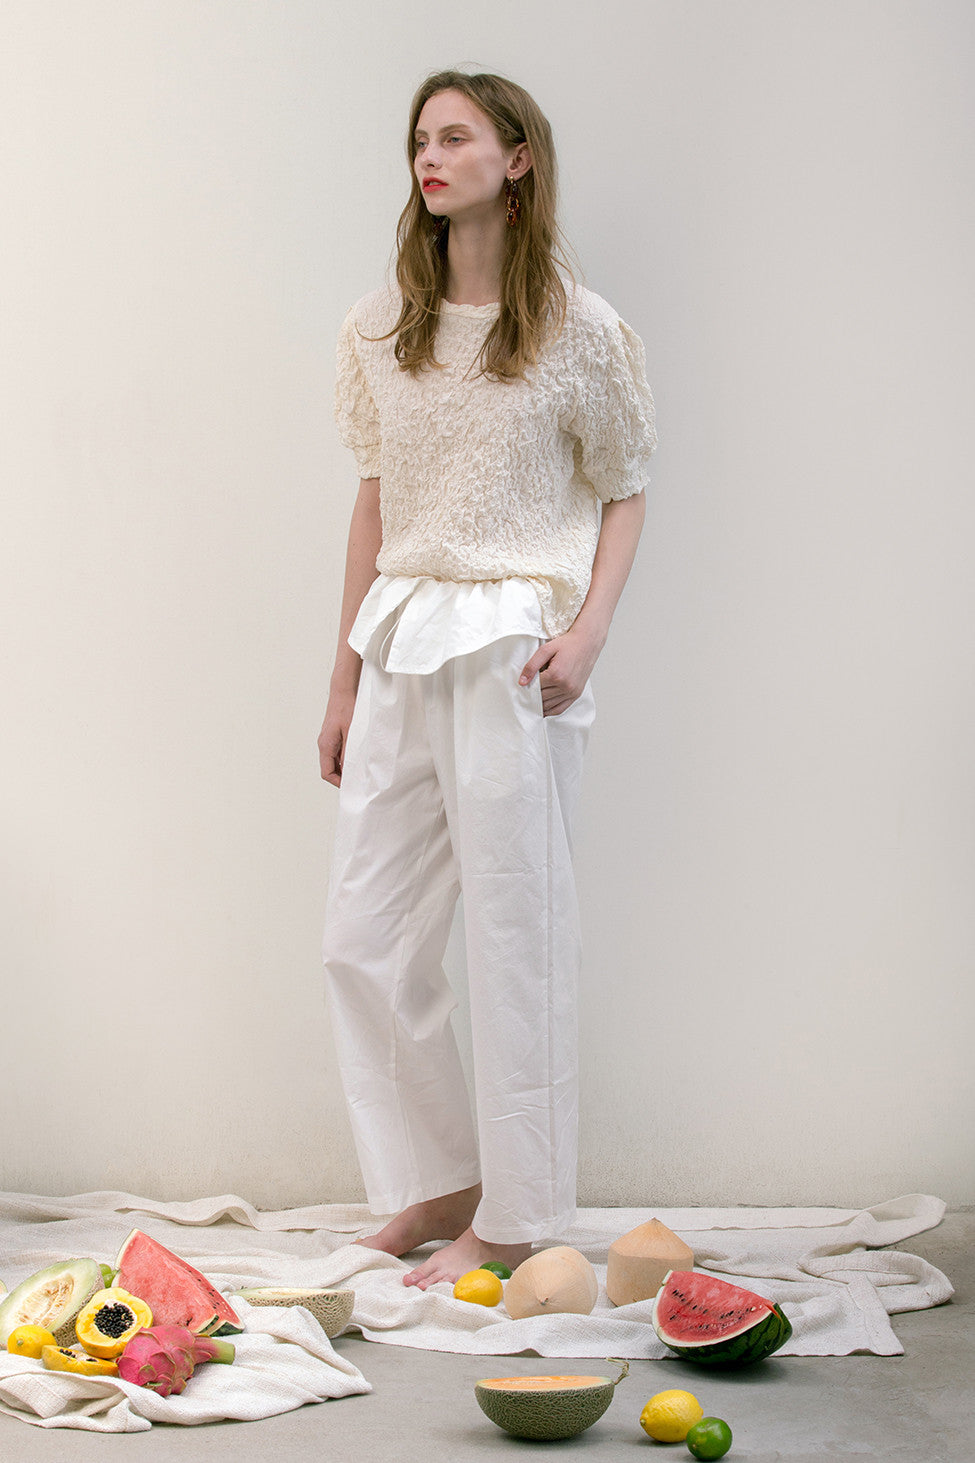 The Lassie Pant in white featuring elastic waistband, two slant pockets. Lightweight.